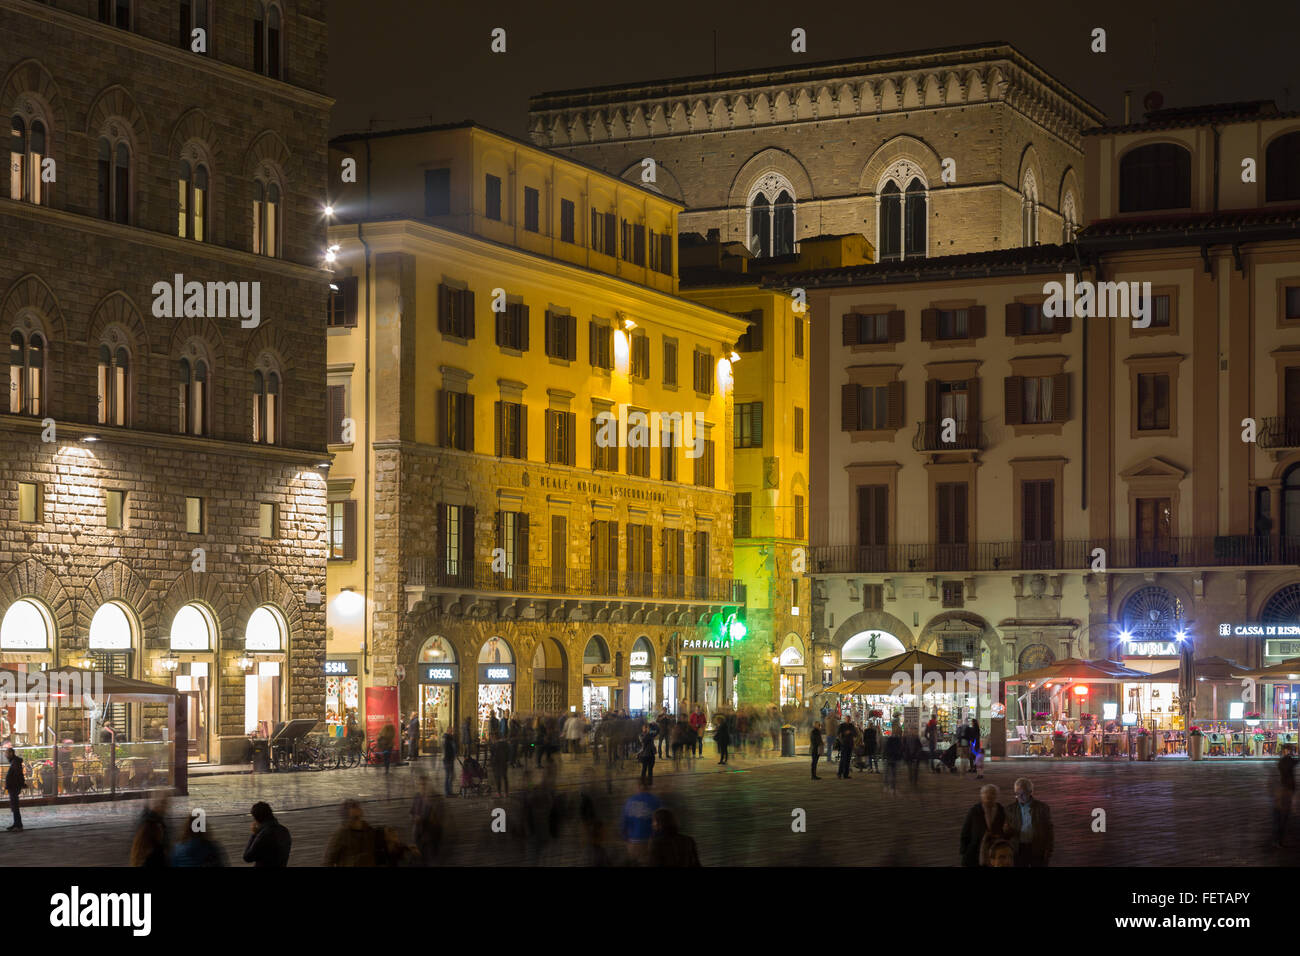 Piazza della Signoria at night, church Orsanmichele church and historic buildings behind, Florence, Tuscany, Italy Stock Photo